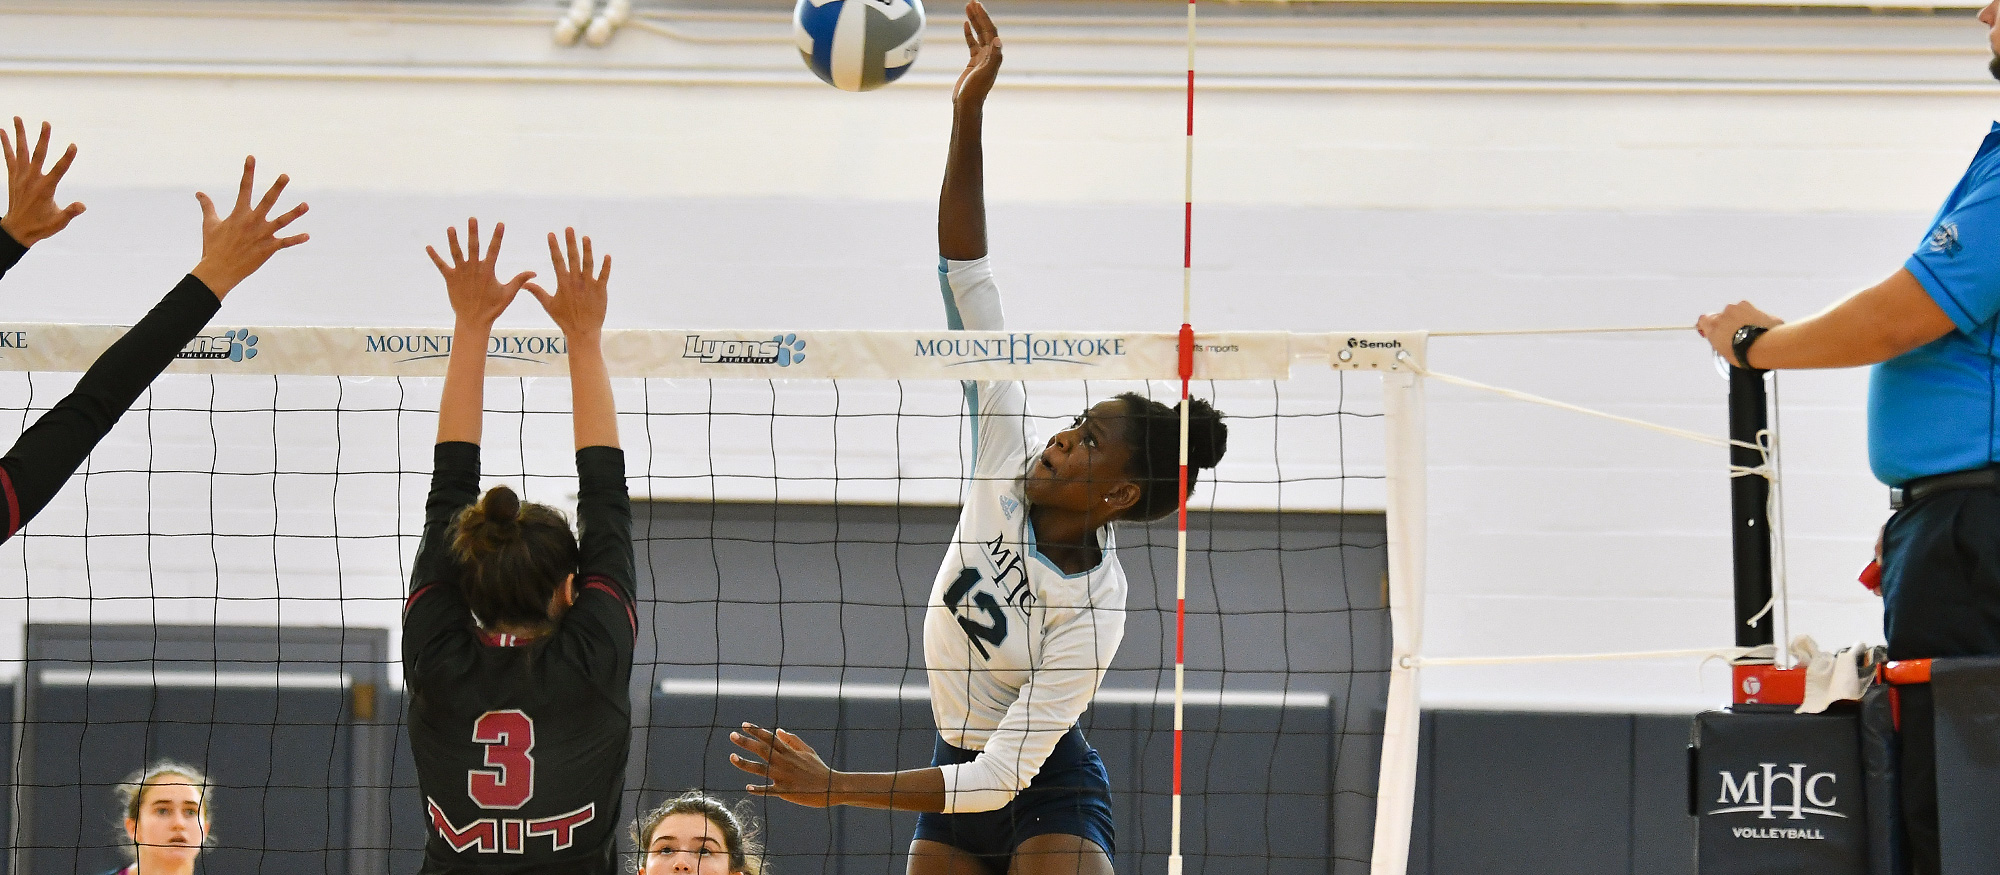 Marion Abeja had 16 kills combined in a pair of 3-0 victories for Mount Holyoke over Framingham State and Fitchburg State on Oct. 15, 2022. (RJB Sports file photo)